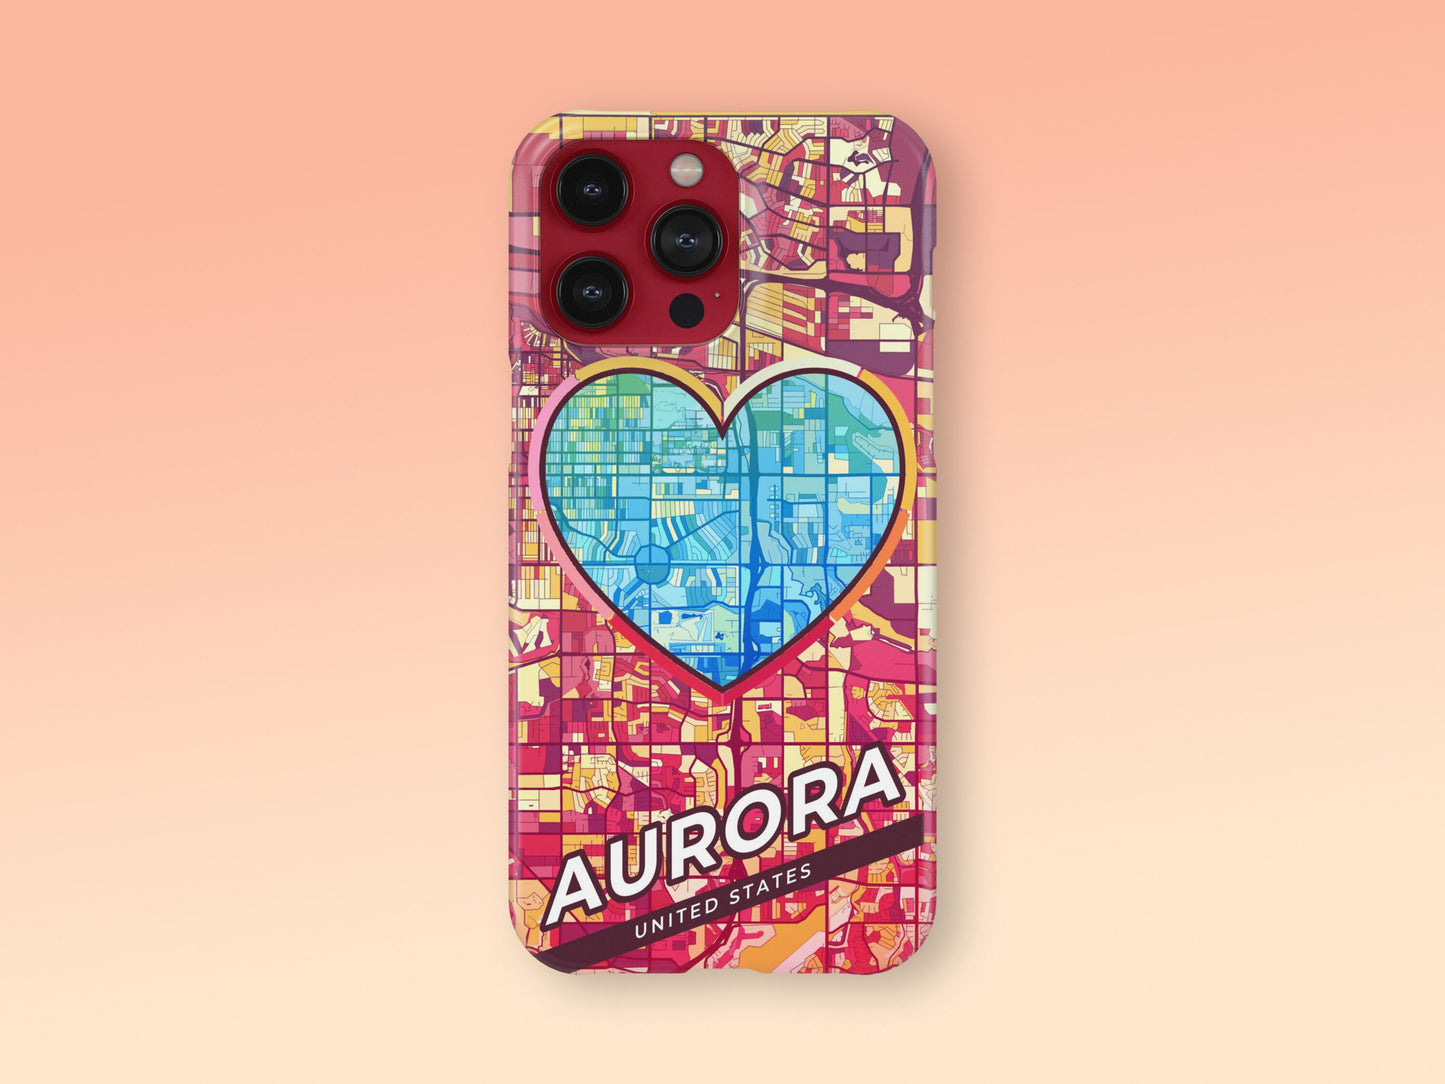 Aurora Colorado slim phone case with colorful icon. Birthday, wedding or housewarming gift. Couple match cases. 2